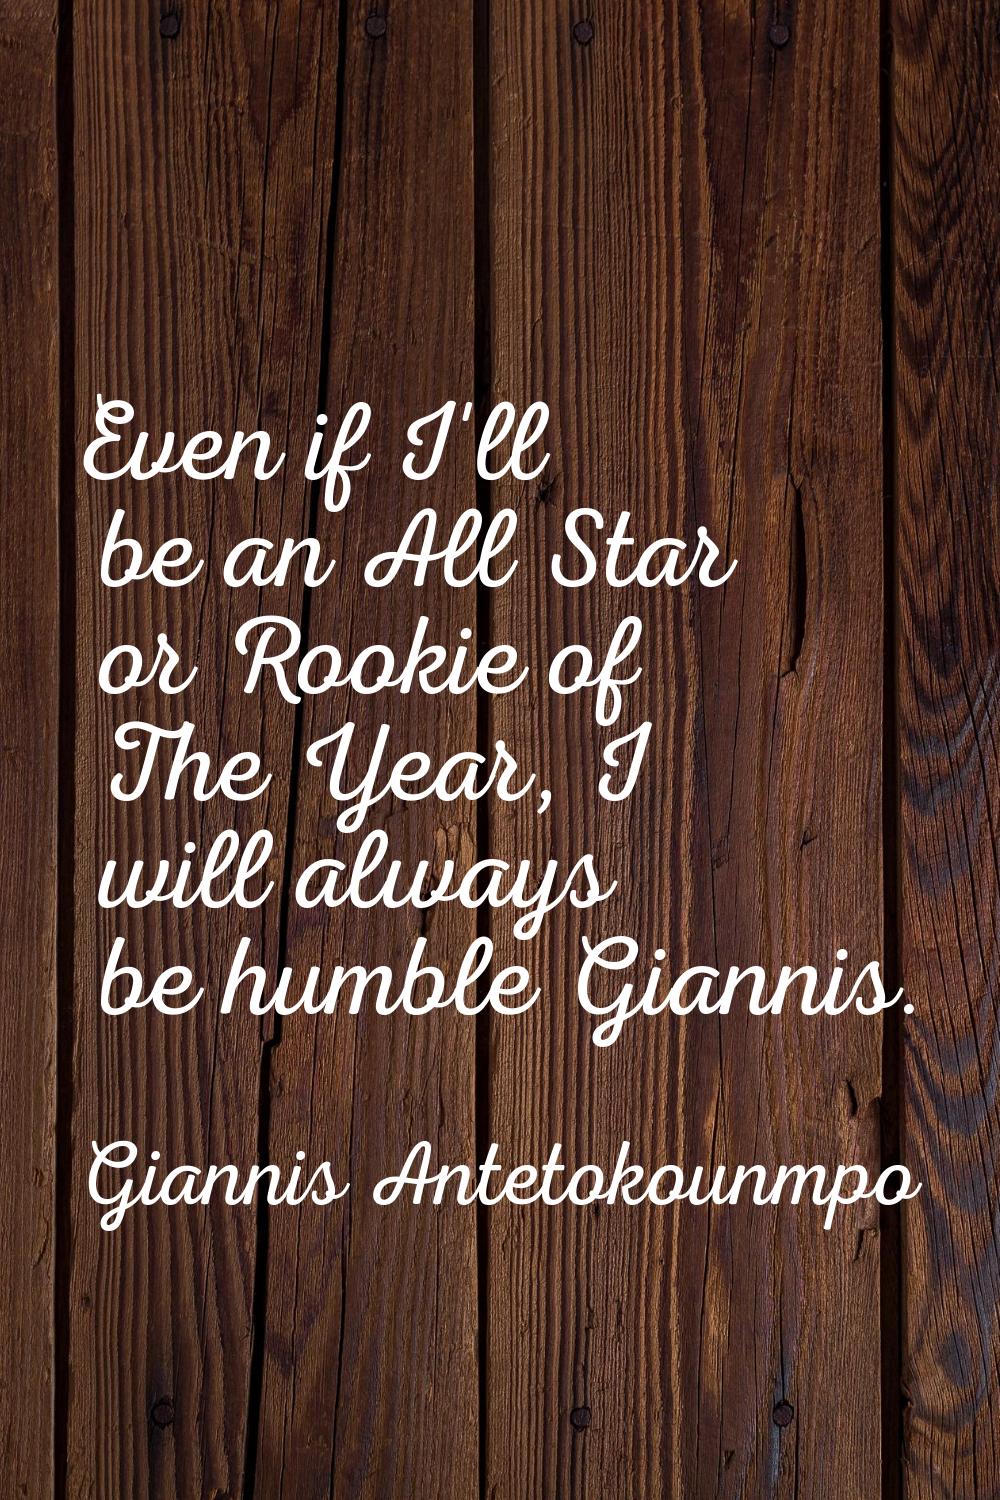 Even if I'll be an All Star or Rookie of The Year, I will always be humble Giannis.